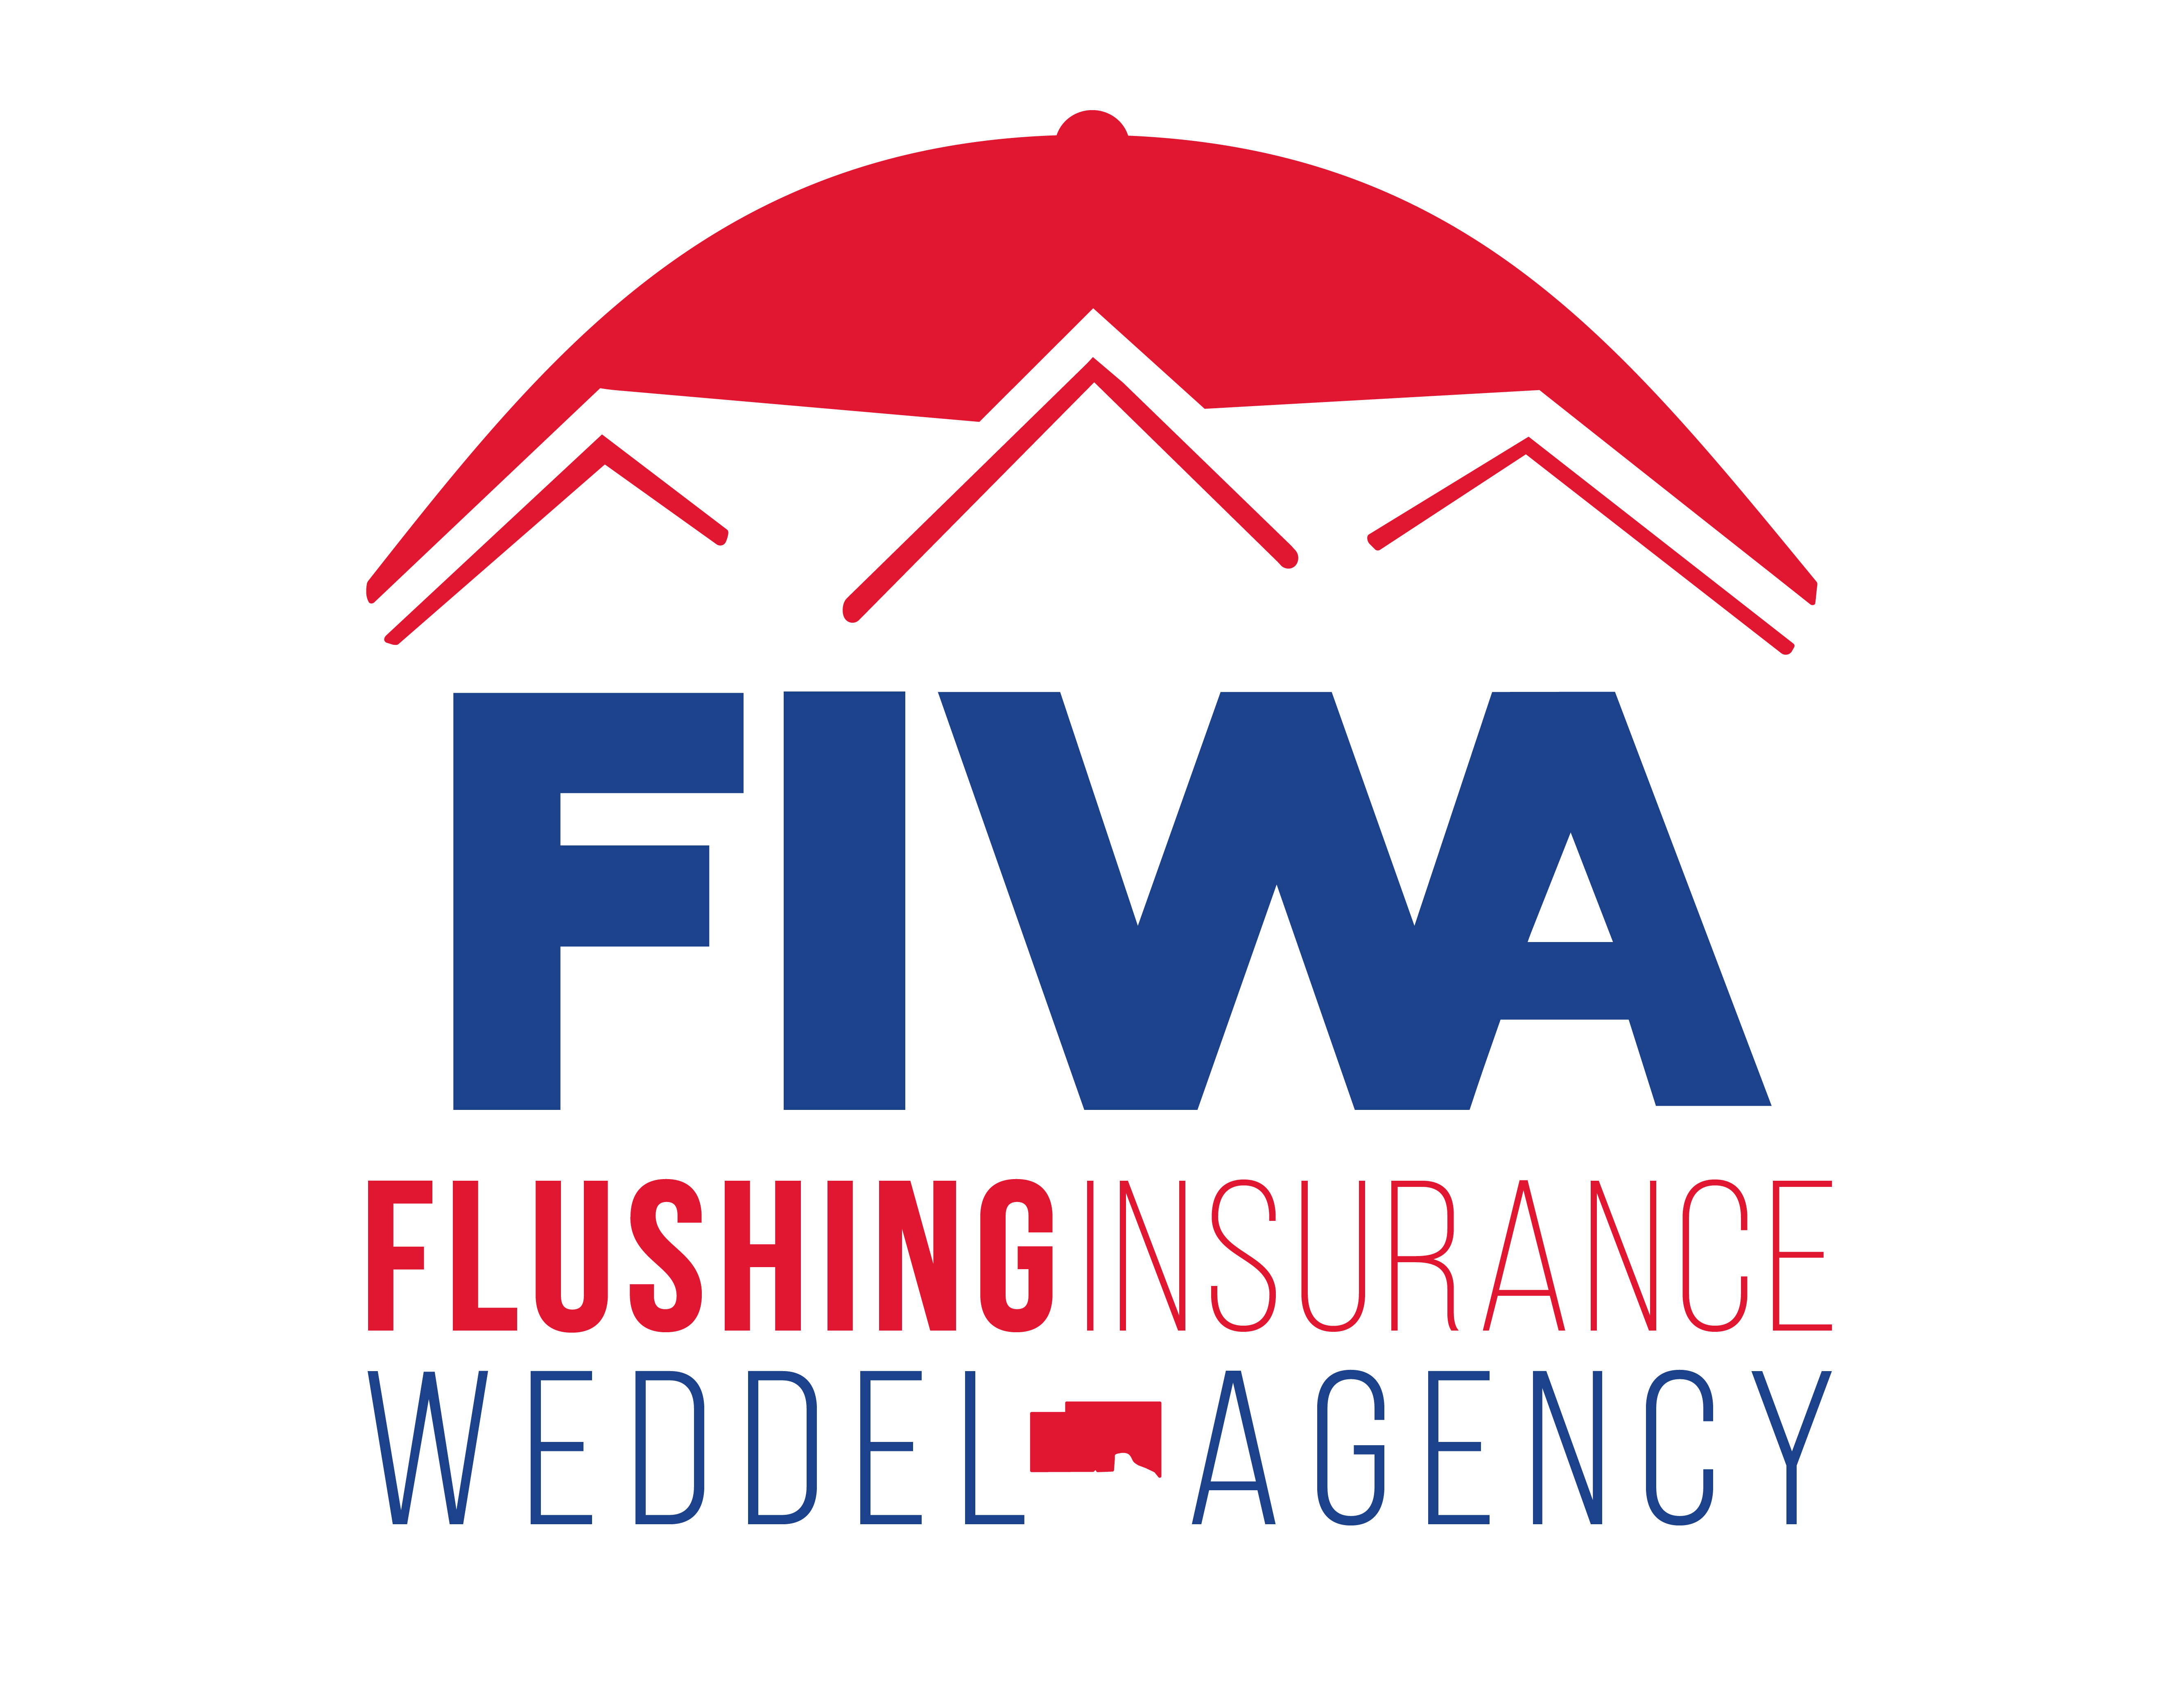 Flushing Insurnace Weddel Agency Logo consisting of a red umbrella over red rooftops with FIWA and the company name underneath.